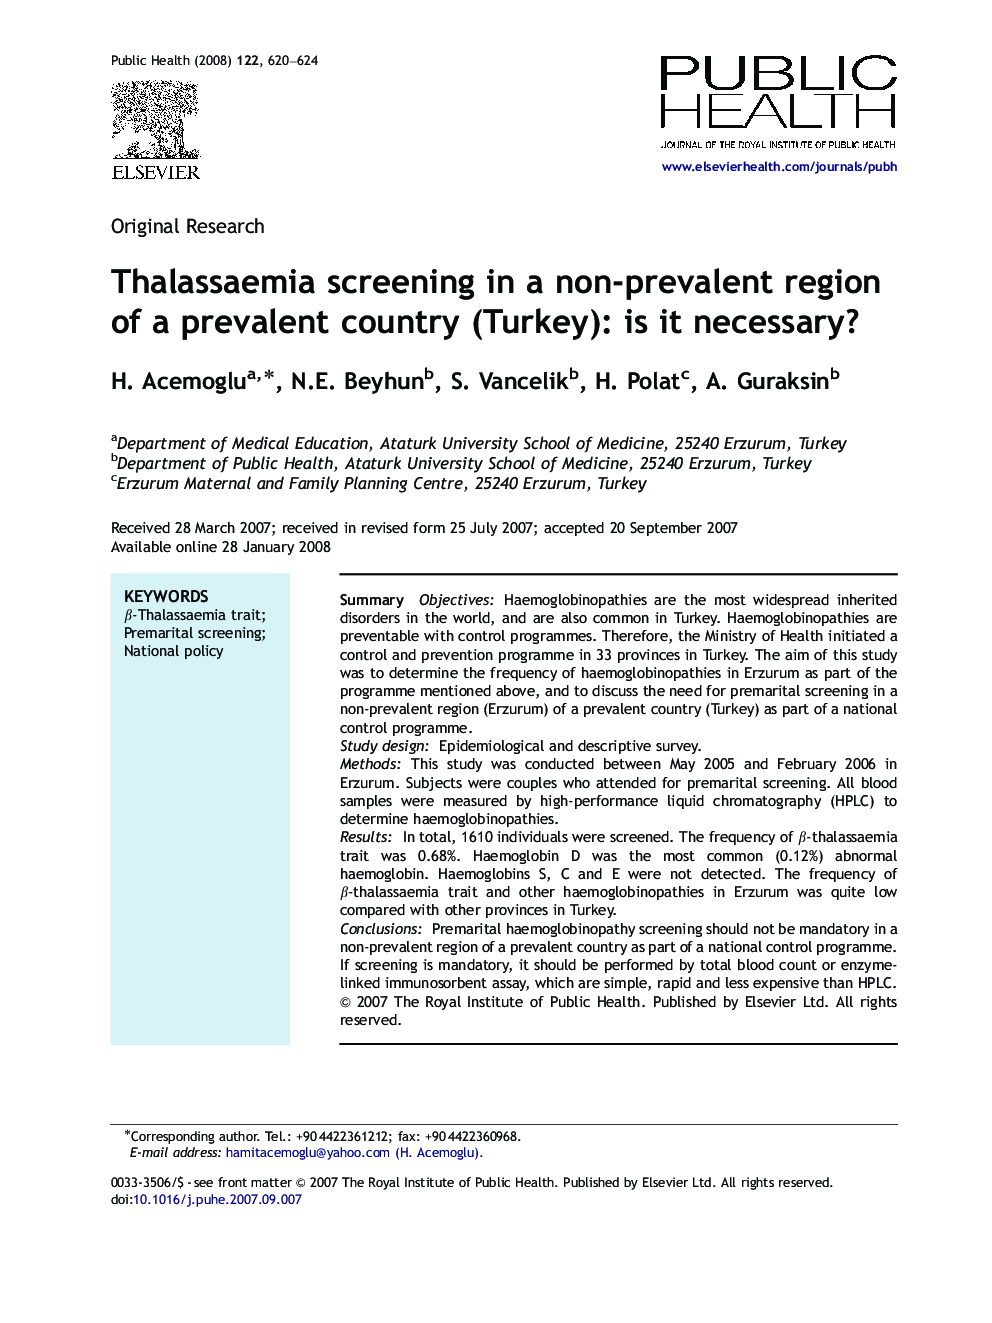 Thalassaemia screening in a non-prevalent region of a prevalent country (Turkey): is it necessary?